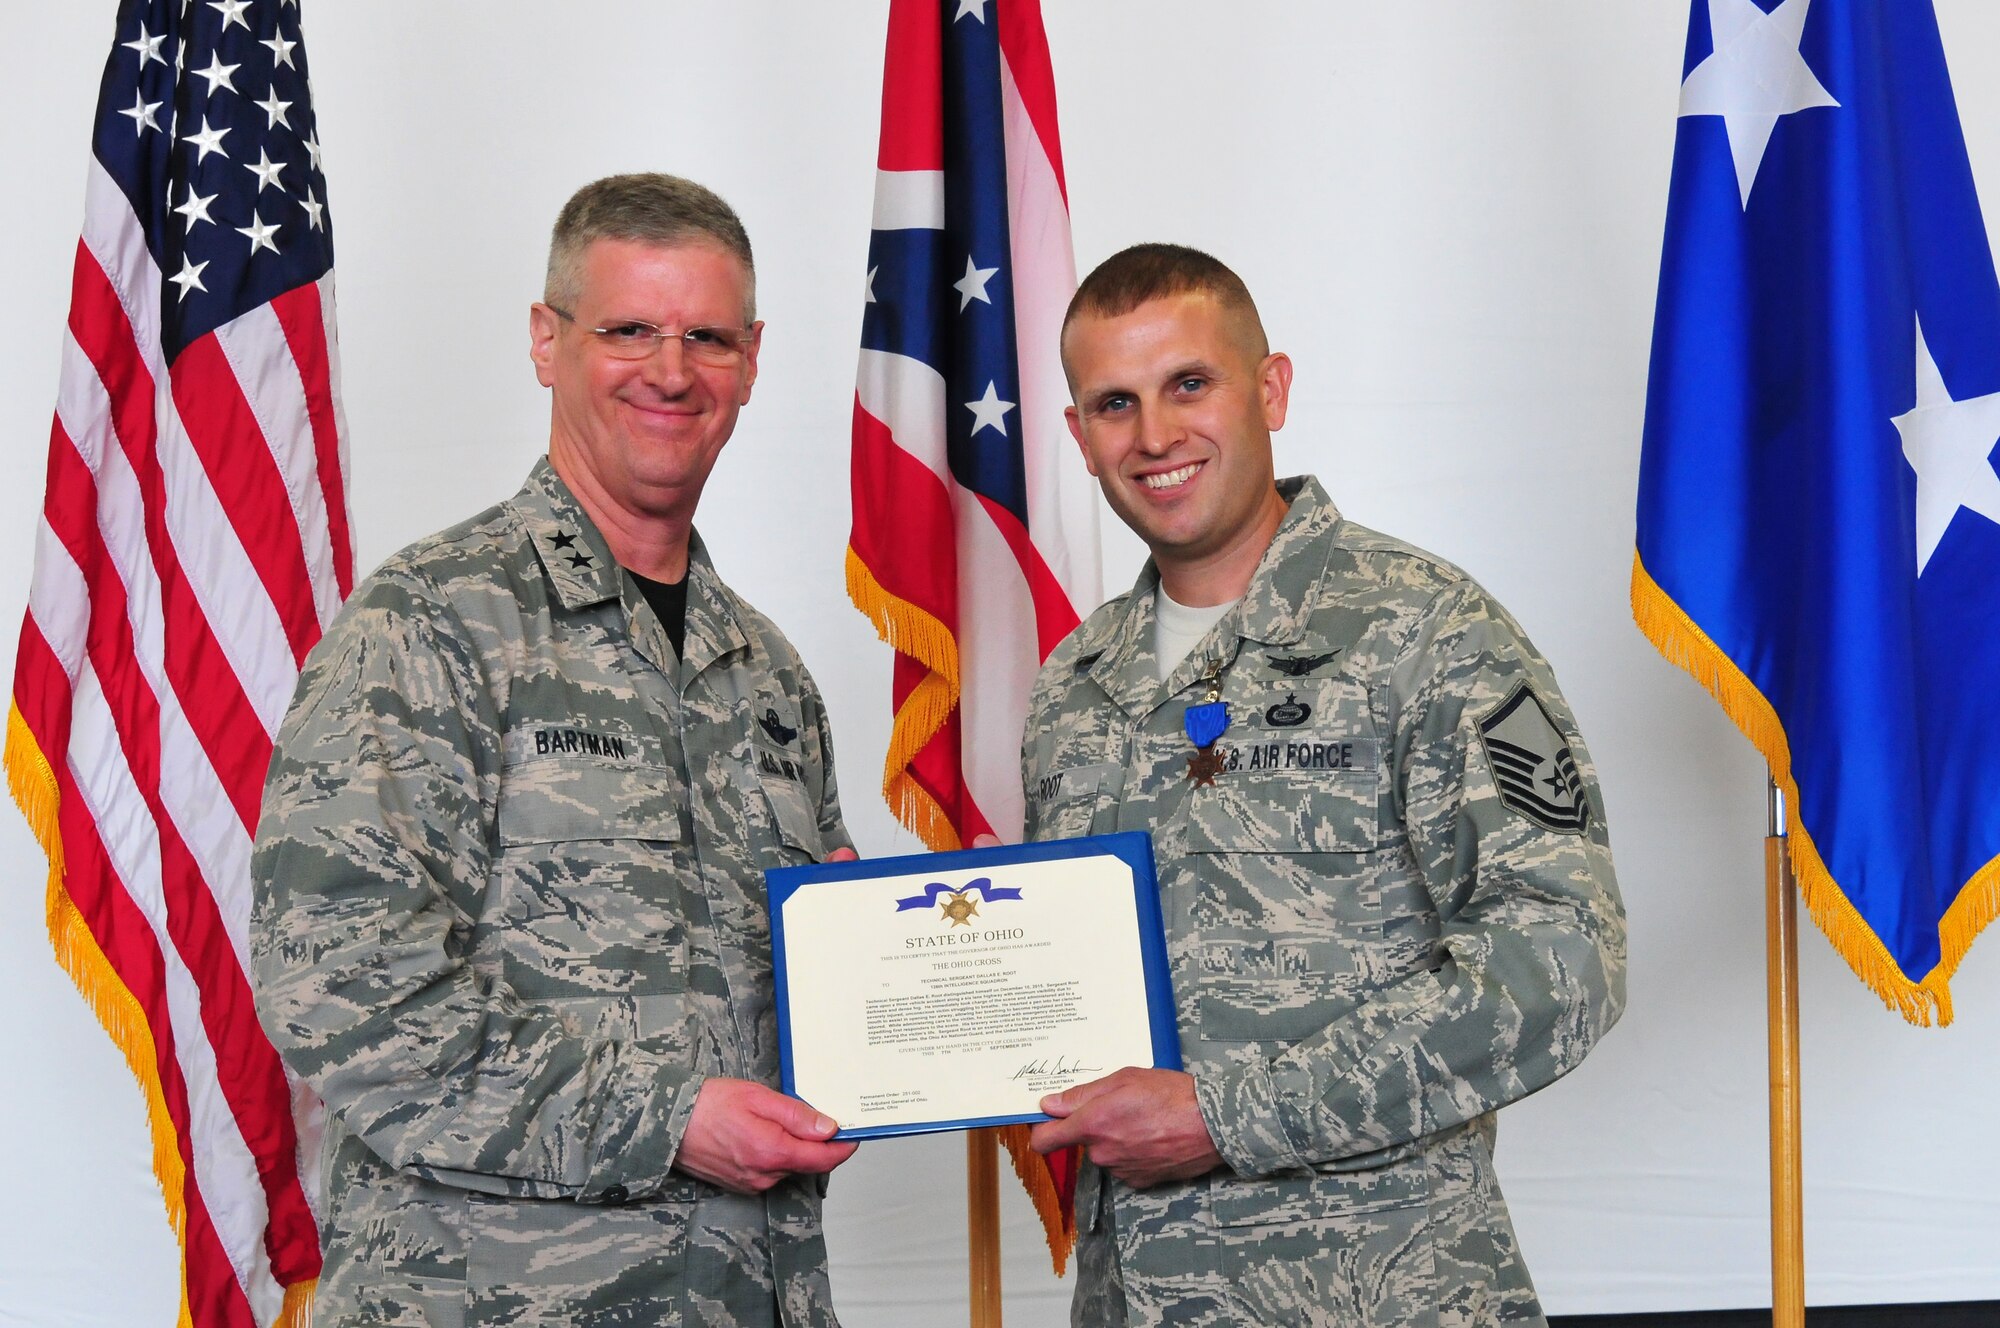 Master Sgt. Dallas Root, a member of the 178th Wing, receives the Ohio Cross award presented by the Ohio Adjutant General, Maj. Gen. Mark Bartman at Springfield Air National Guard Base in Springfield, Ohio, Oct. 15, 2016. Root received the award for administering aid to a vehicle accident victim, and coordinating with emergency dispatchers. Ten years ago, Root received his first Ohio Cross for diving into a freezing pond to save a vehicle accident victim. (U.S. Air National Guard photo by Rachel Simones)